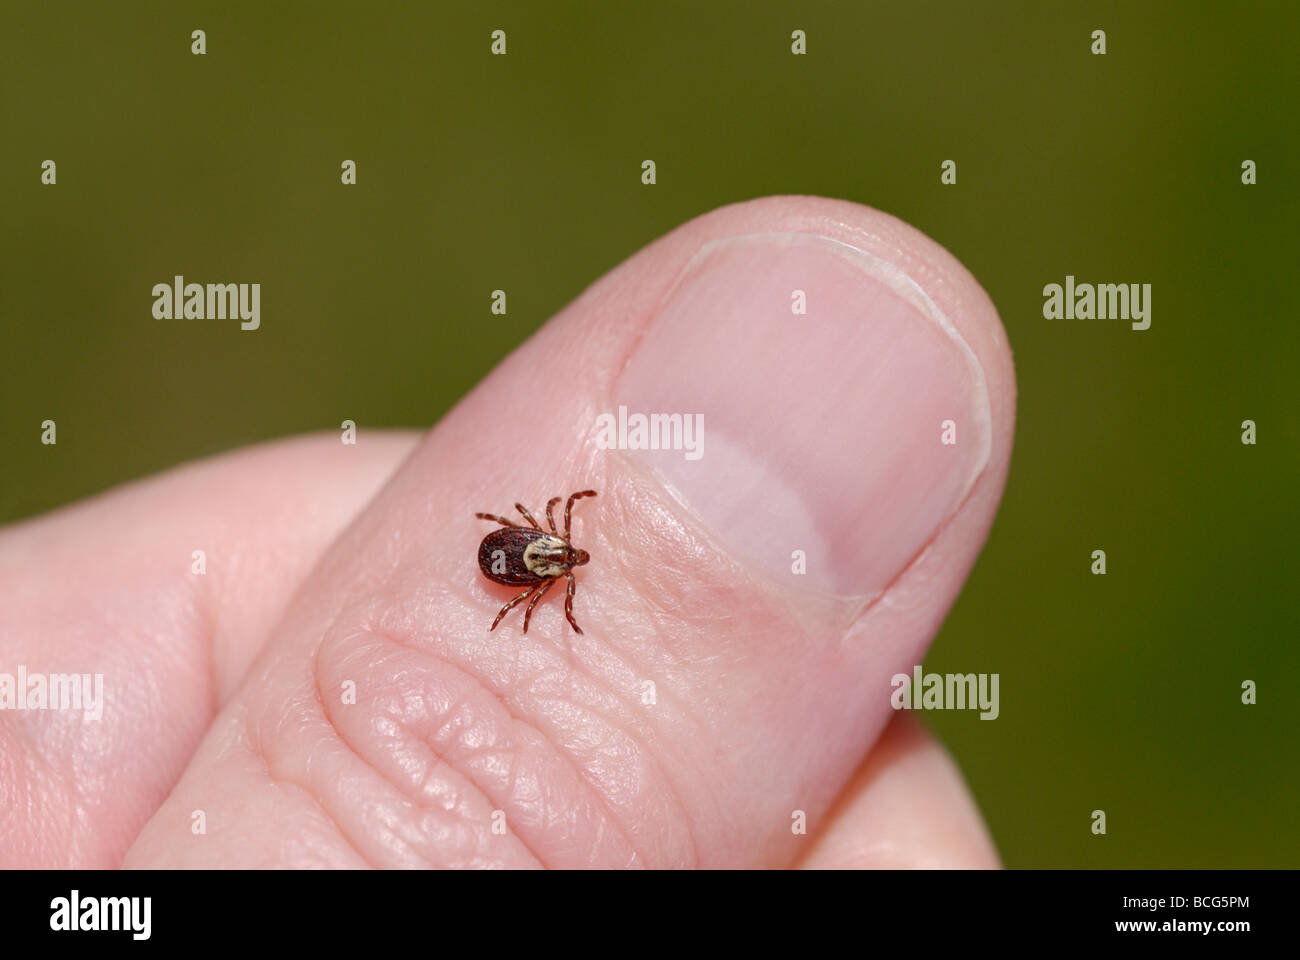 Female American dog tick, Dermacentor variabilis, also known as the wood tick Stock Photo